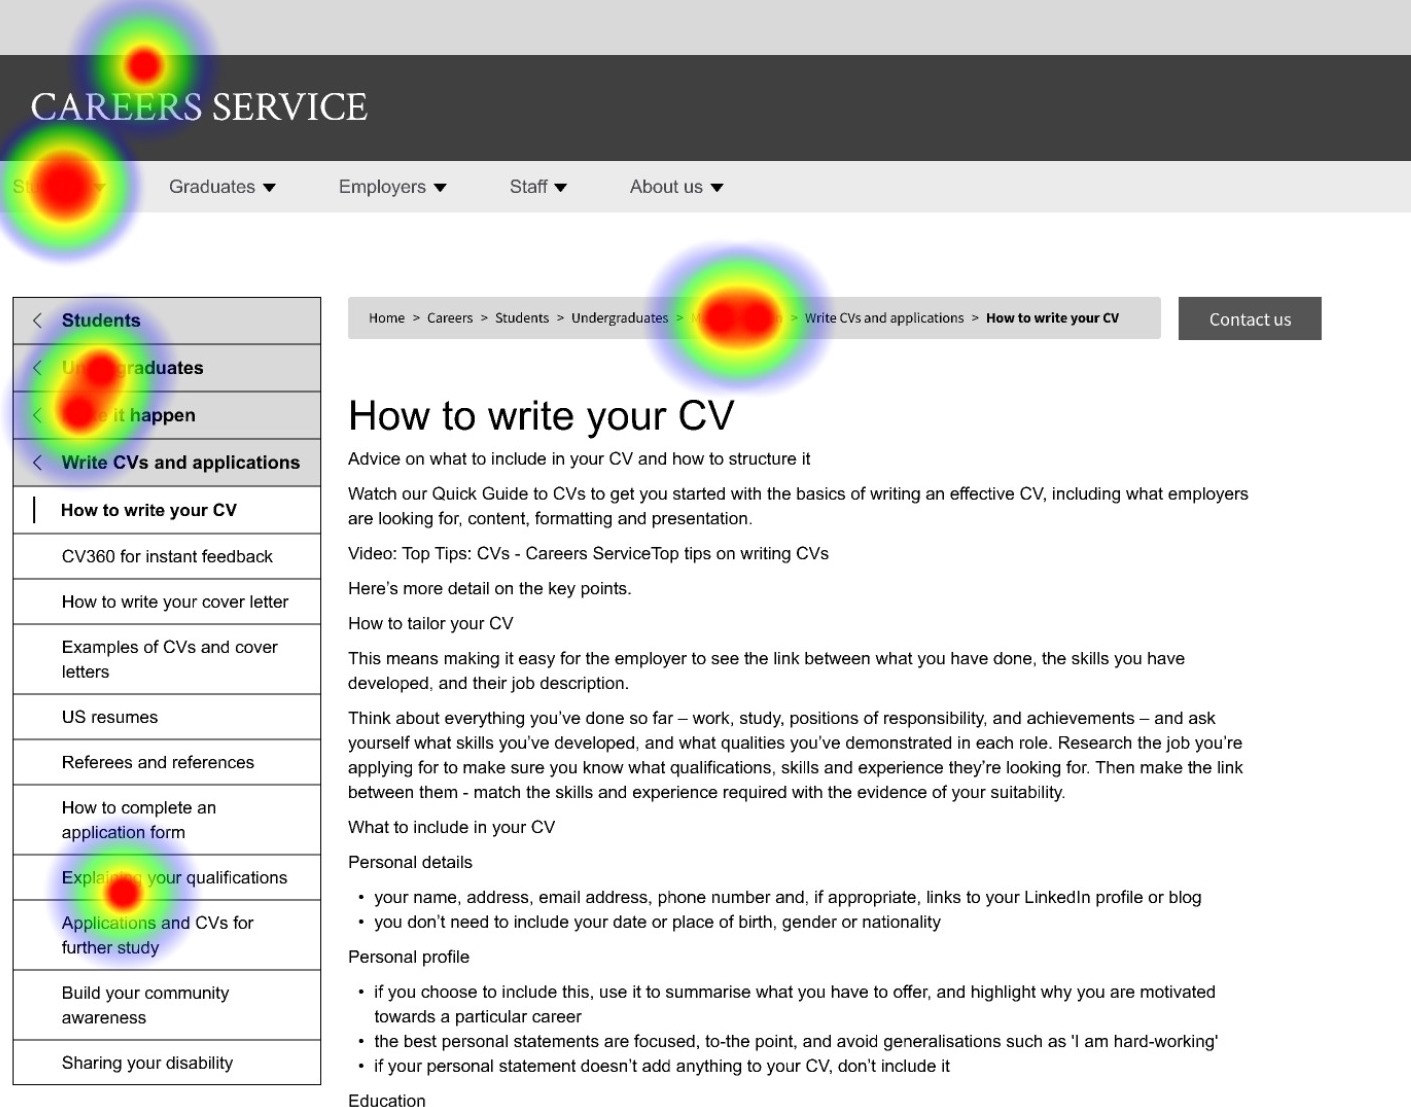 Heatmap to show where users were clicking to find information for interview advice